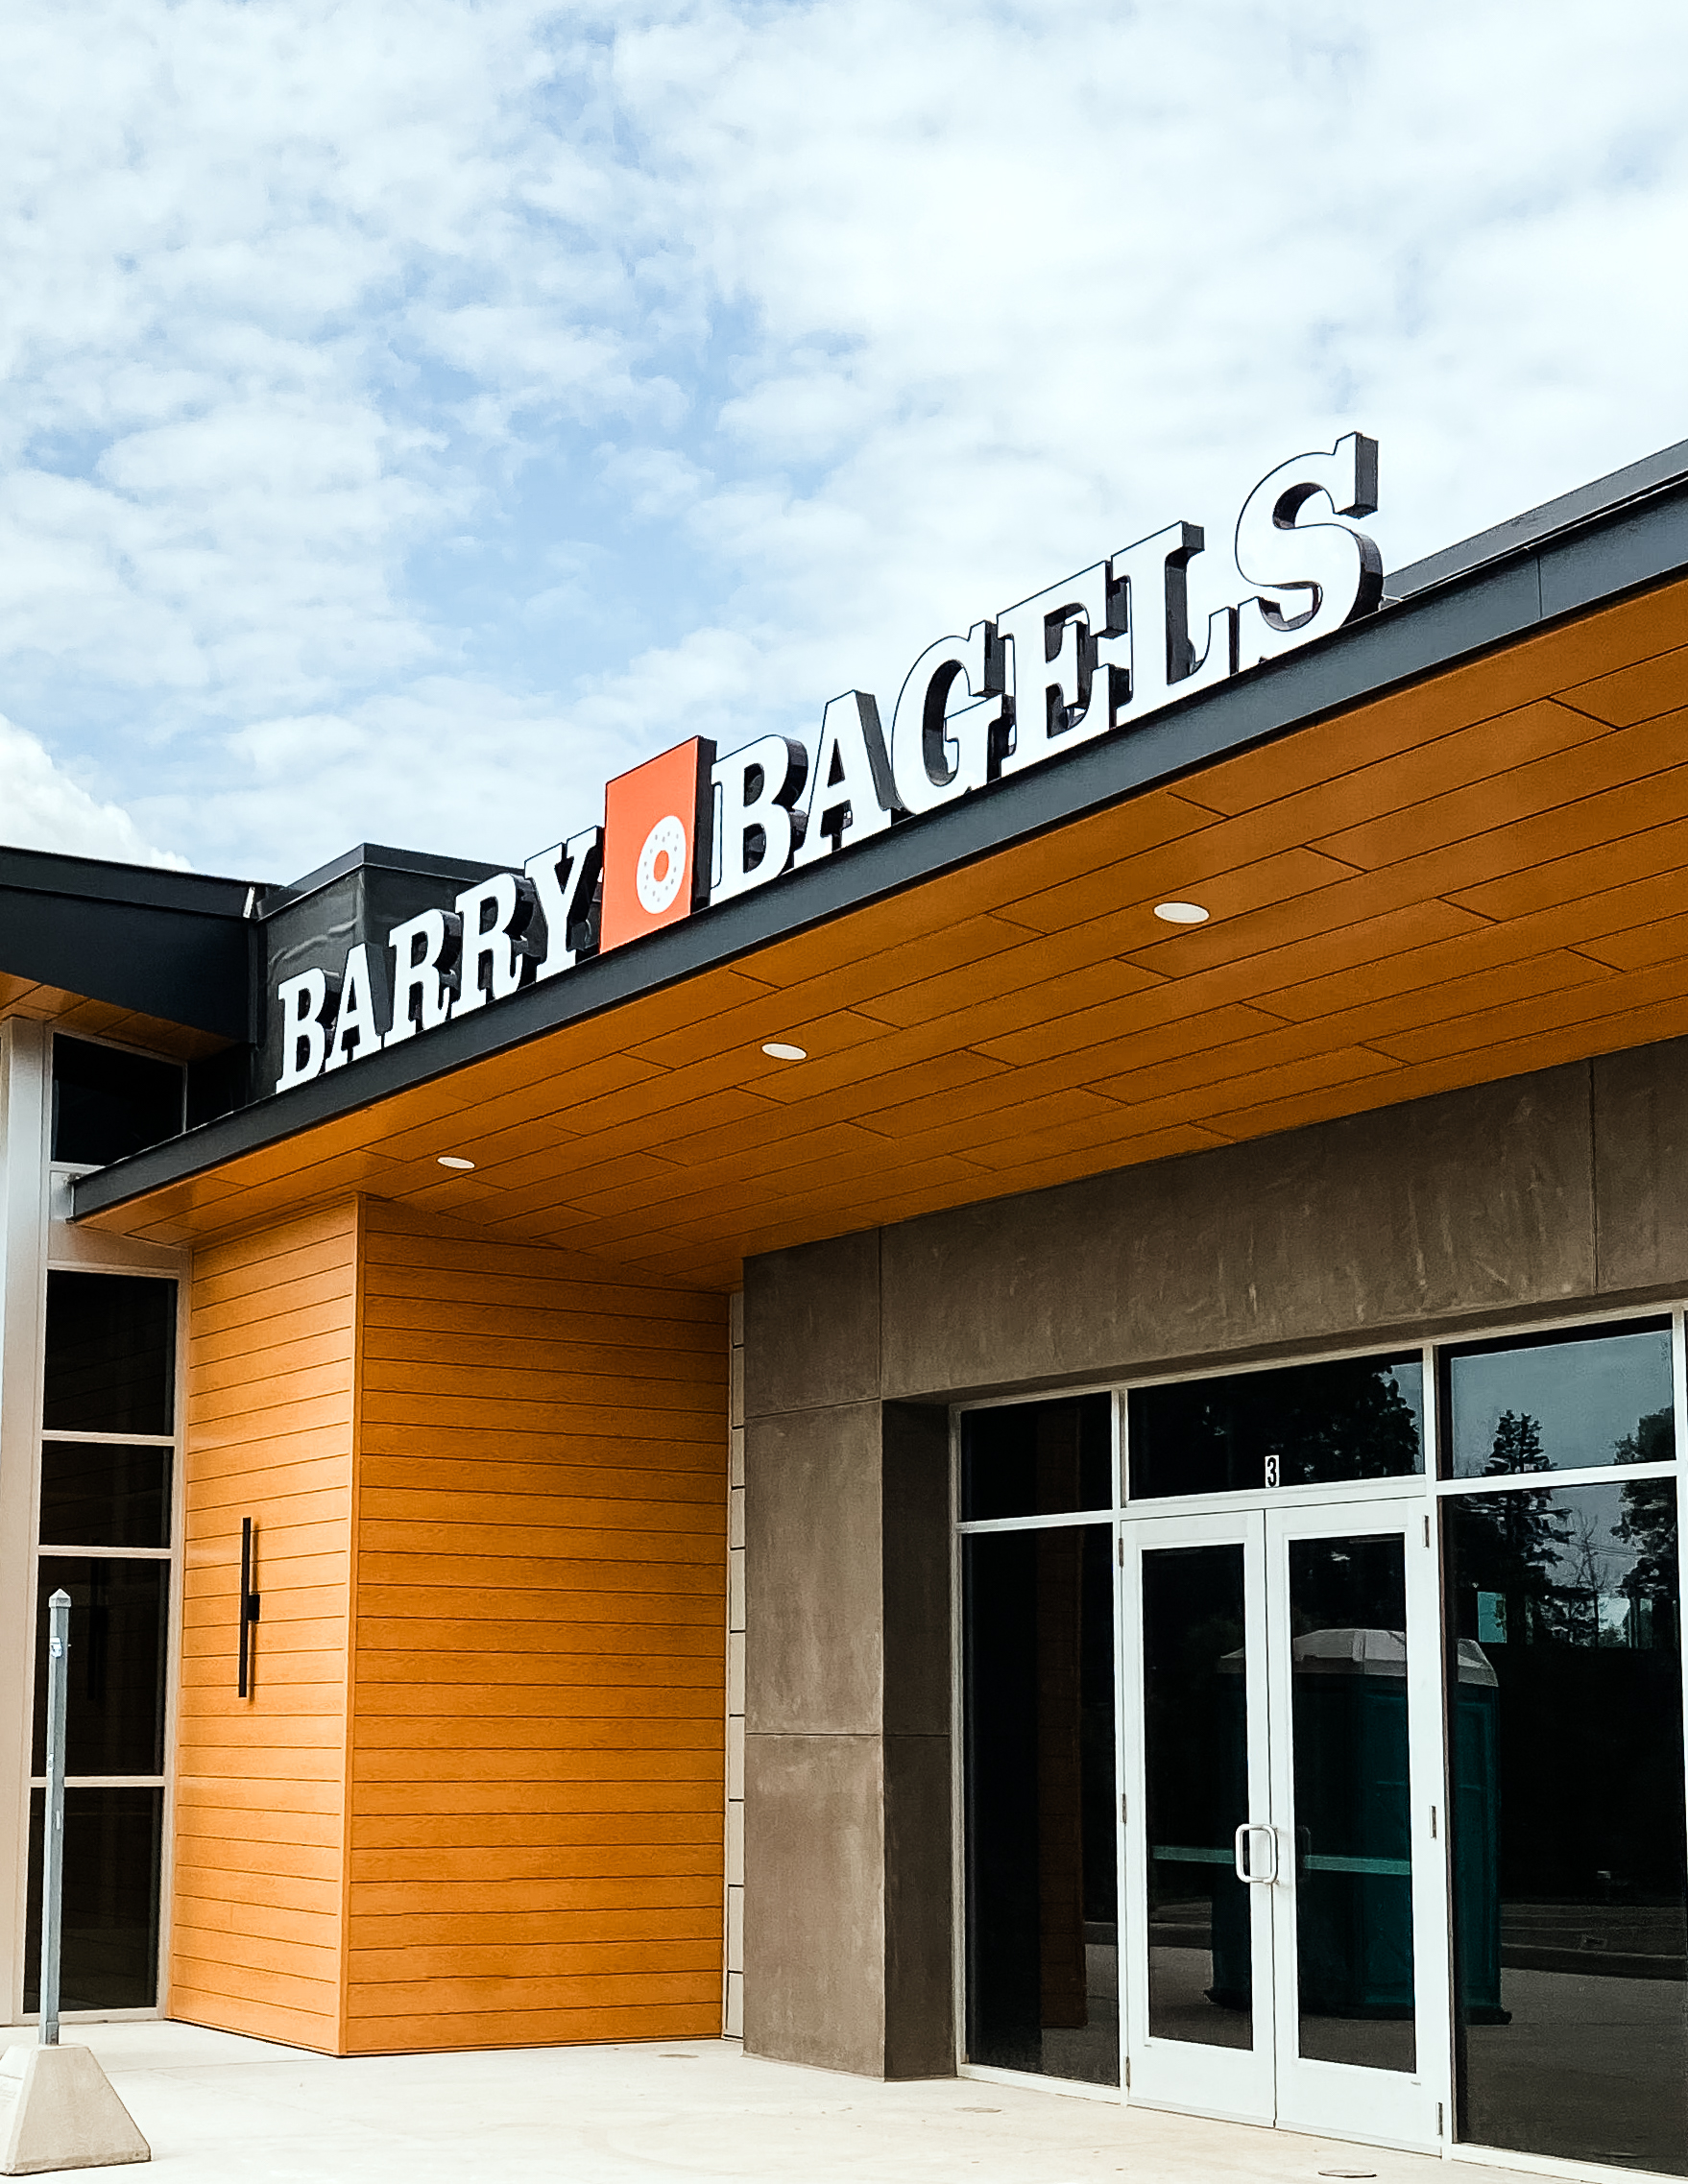 Welcoming Barry Bagels to Their New Location with Modern Channel Letter Signs